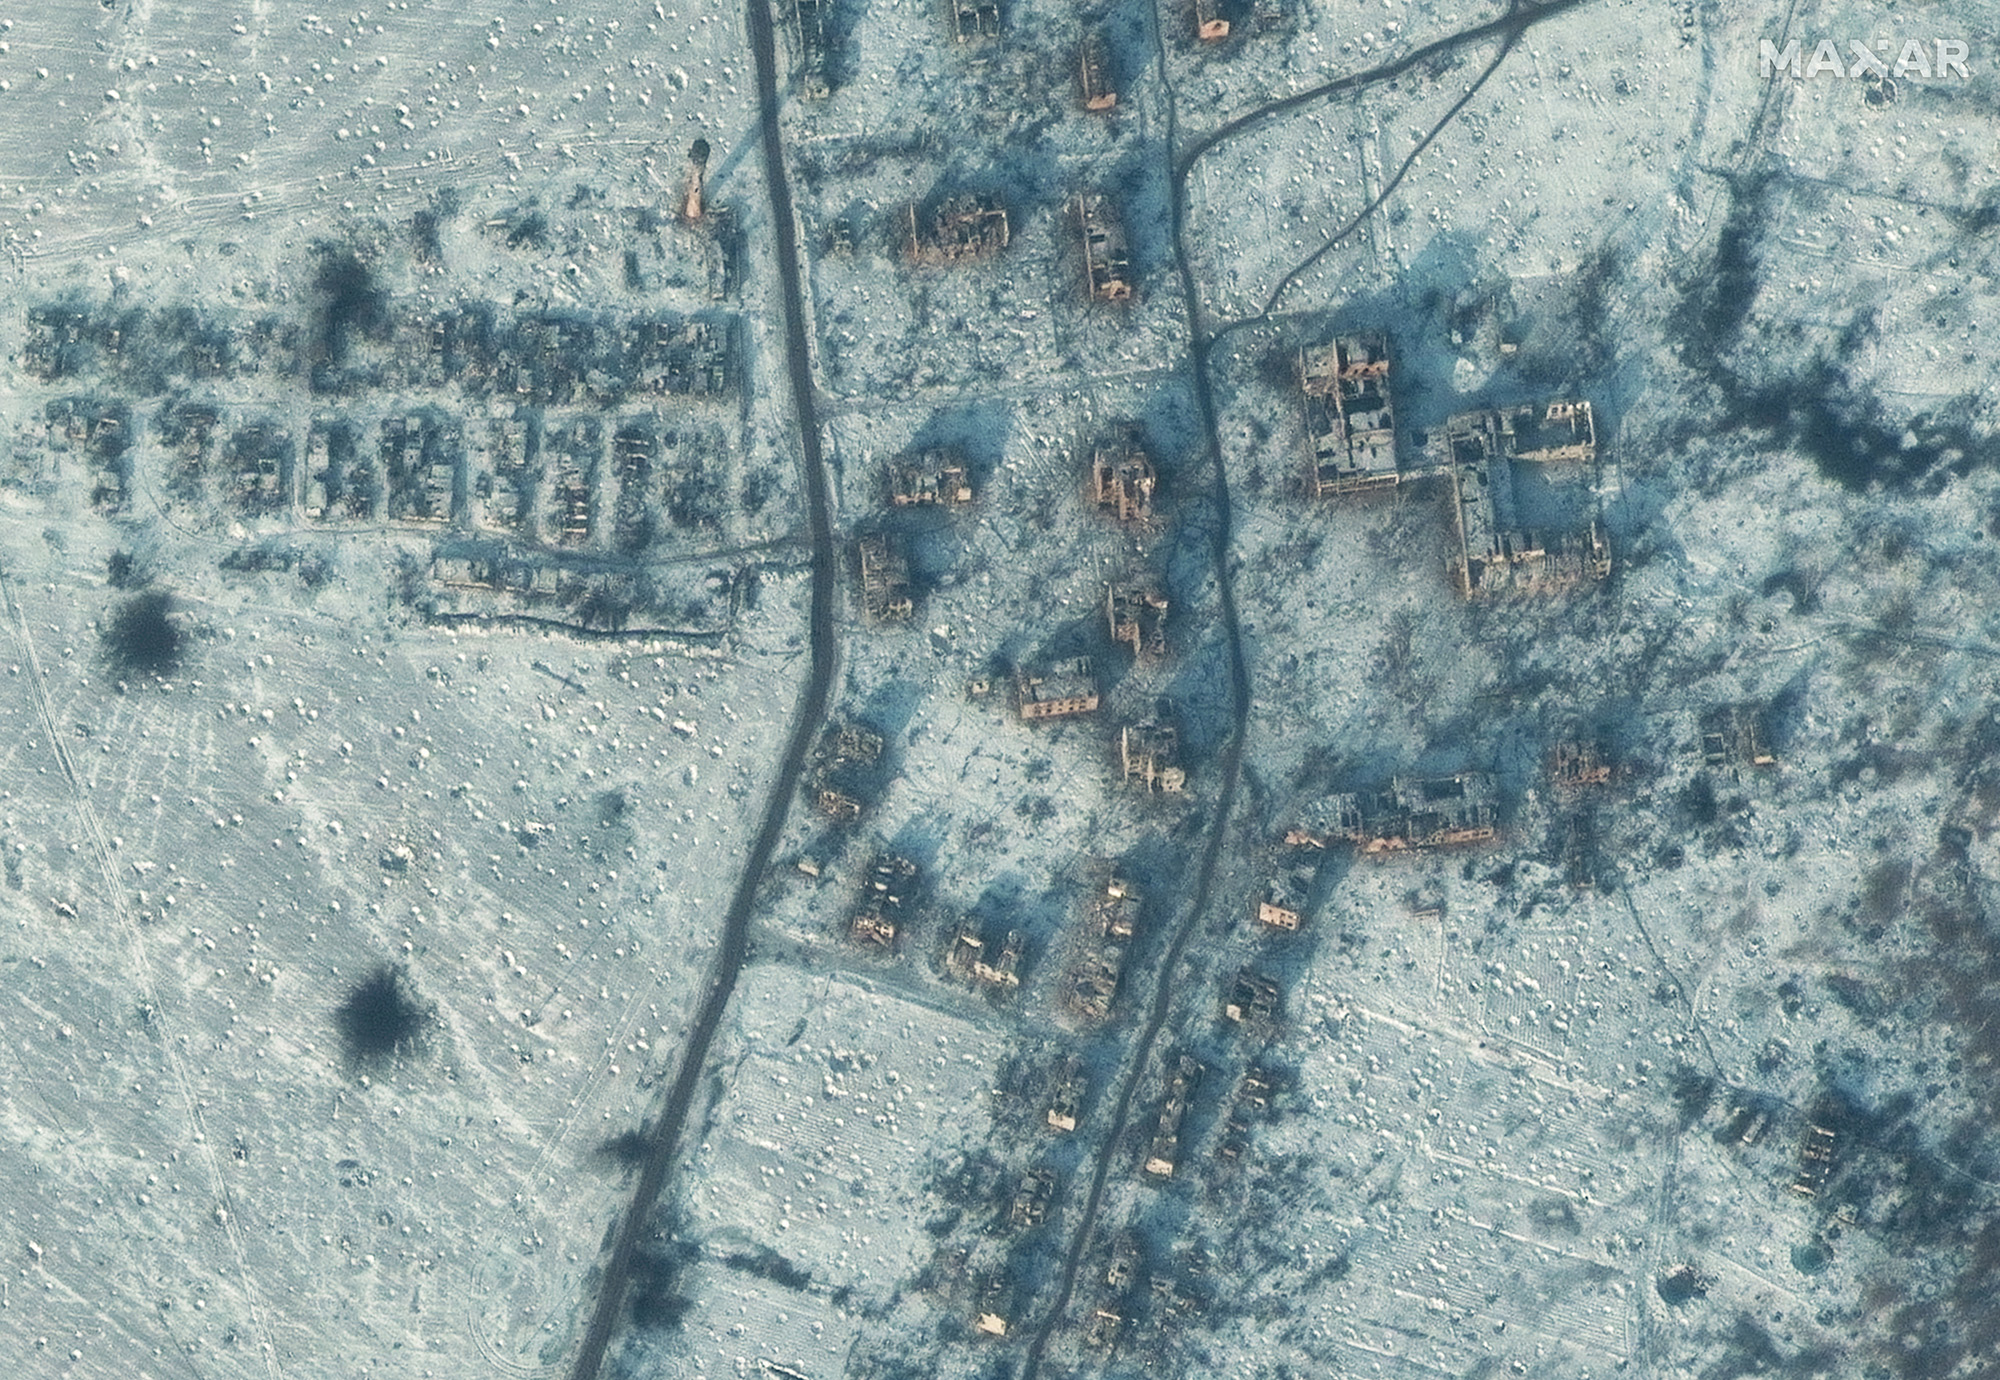 A satellite view shows a destroyed school and buildings in south Soledar, Ukraine, on January 10, 2023.